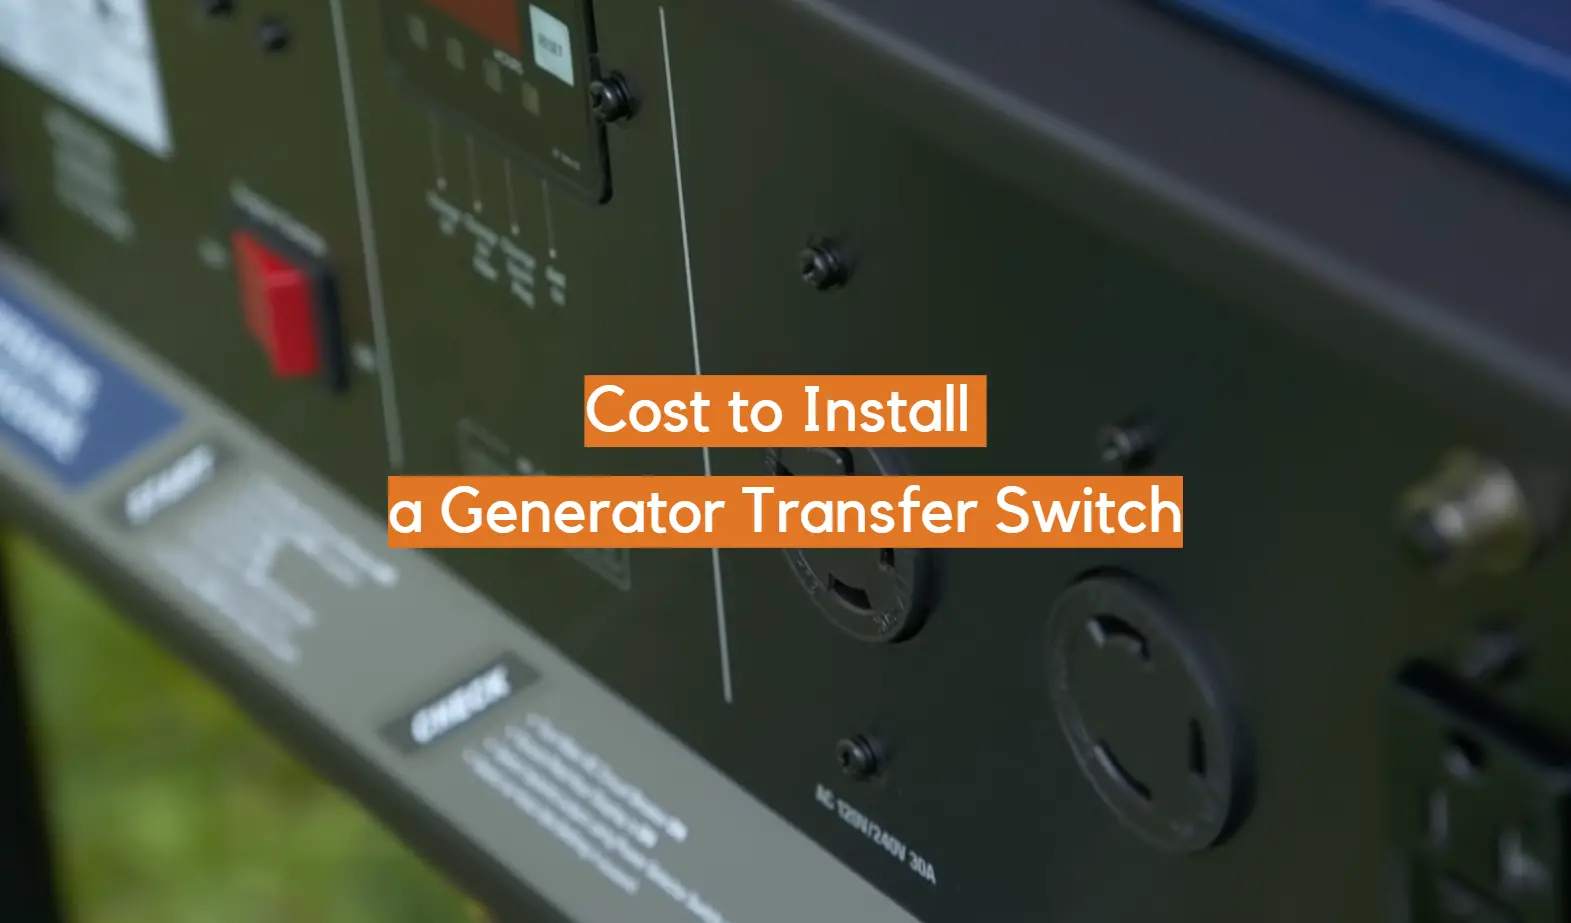 Cost to Install a Generator Transfer Switch